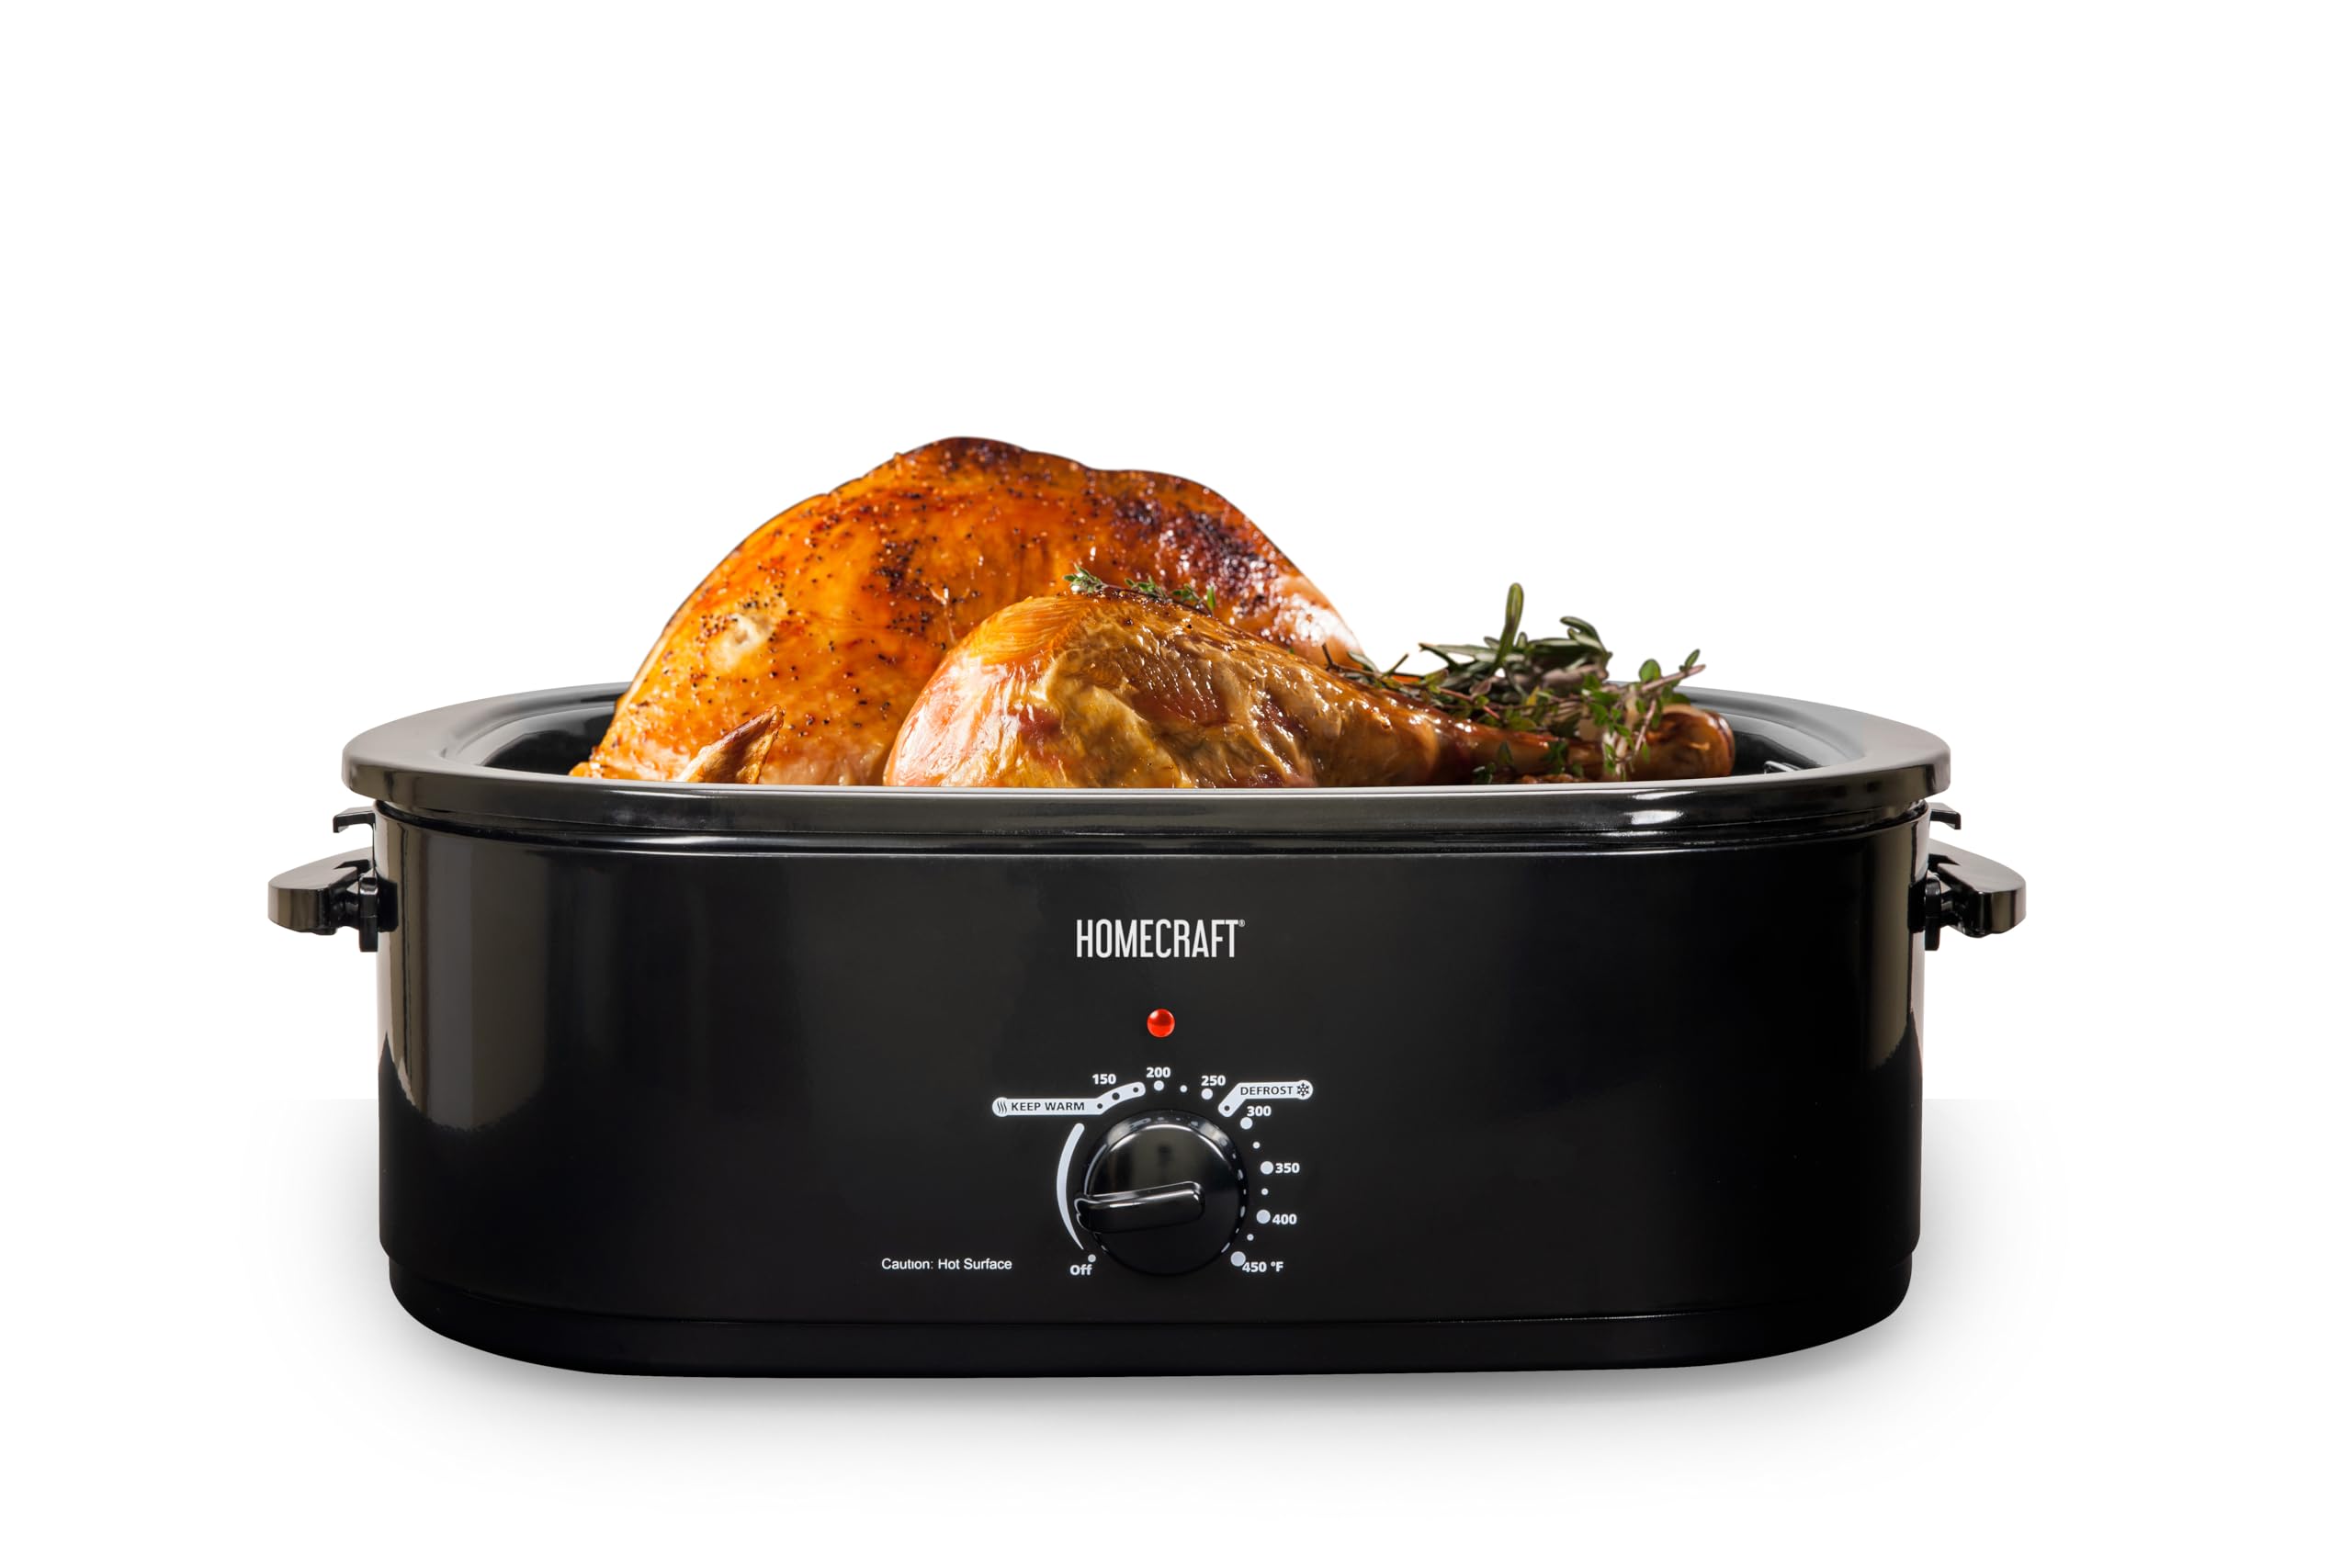 HomeCraft Electric Roaster Oven, 18-Quart Capacity for Turkey, Chicken, Meat, Vegetables, Full-Range Temperature Control, Lift-Out Rack, and Removable Enamel Pot Included, Black